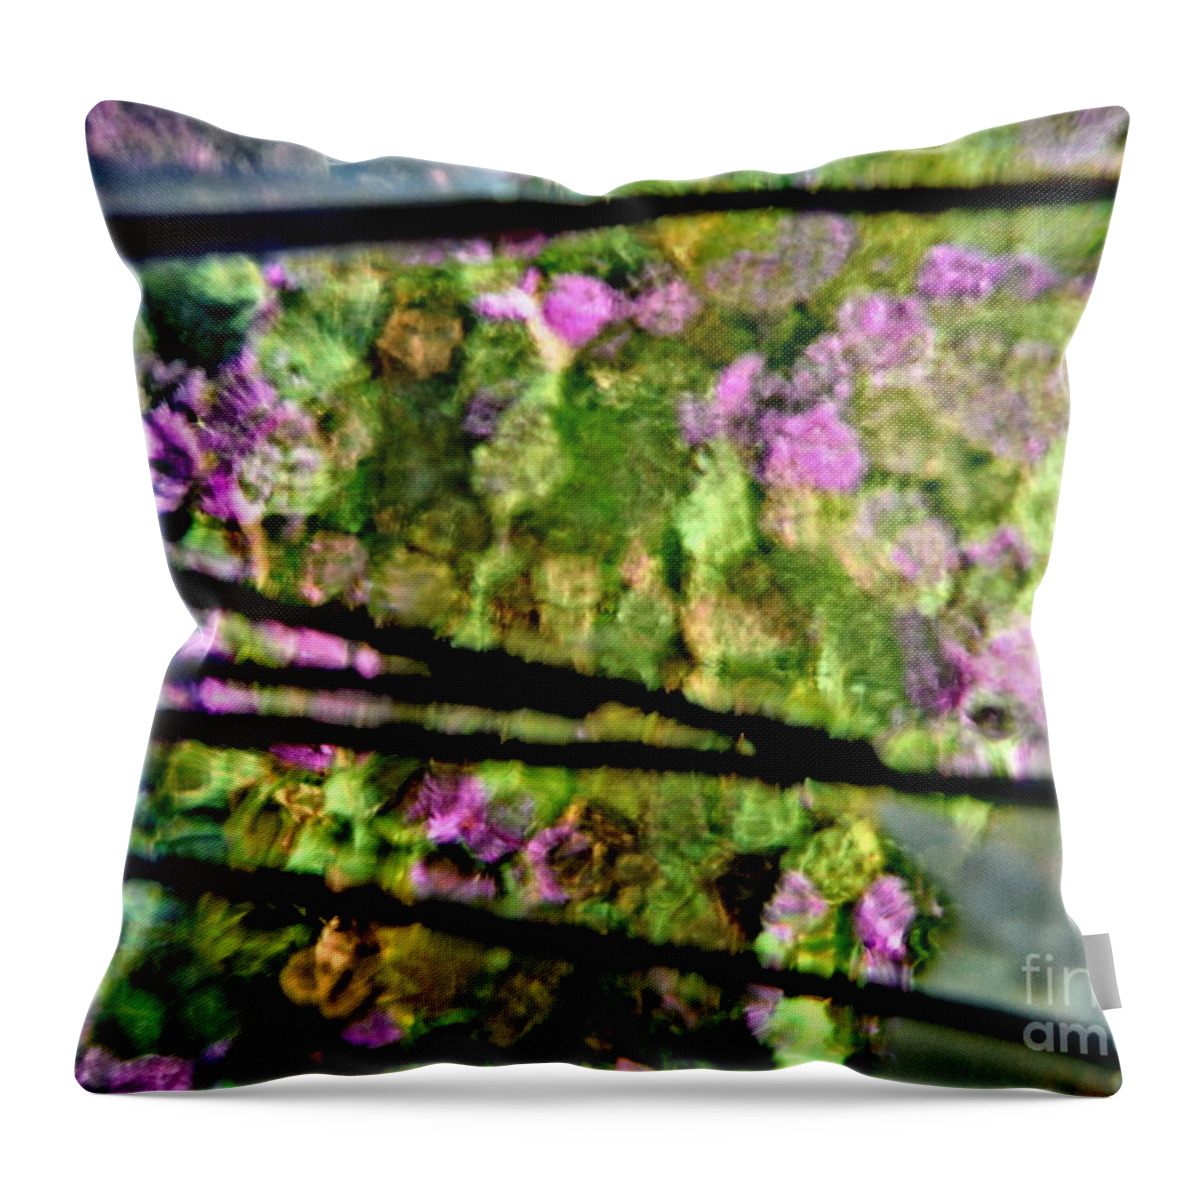 Color To Color Series 28 Throw Pillow featuring the photograph Color To Color Series 28 by Paddy Shaffer